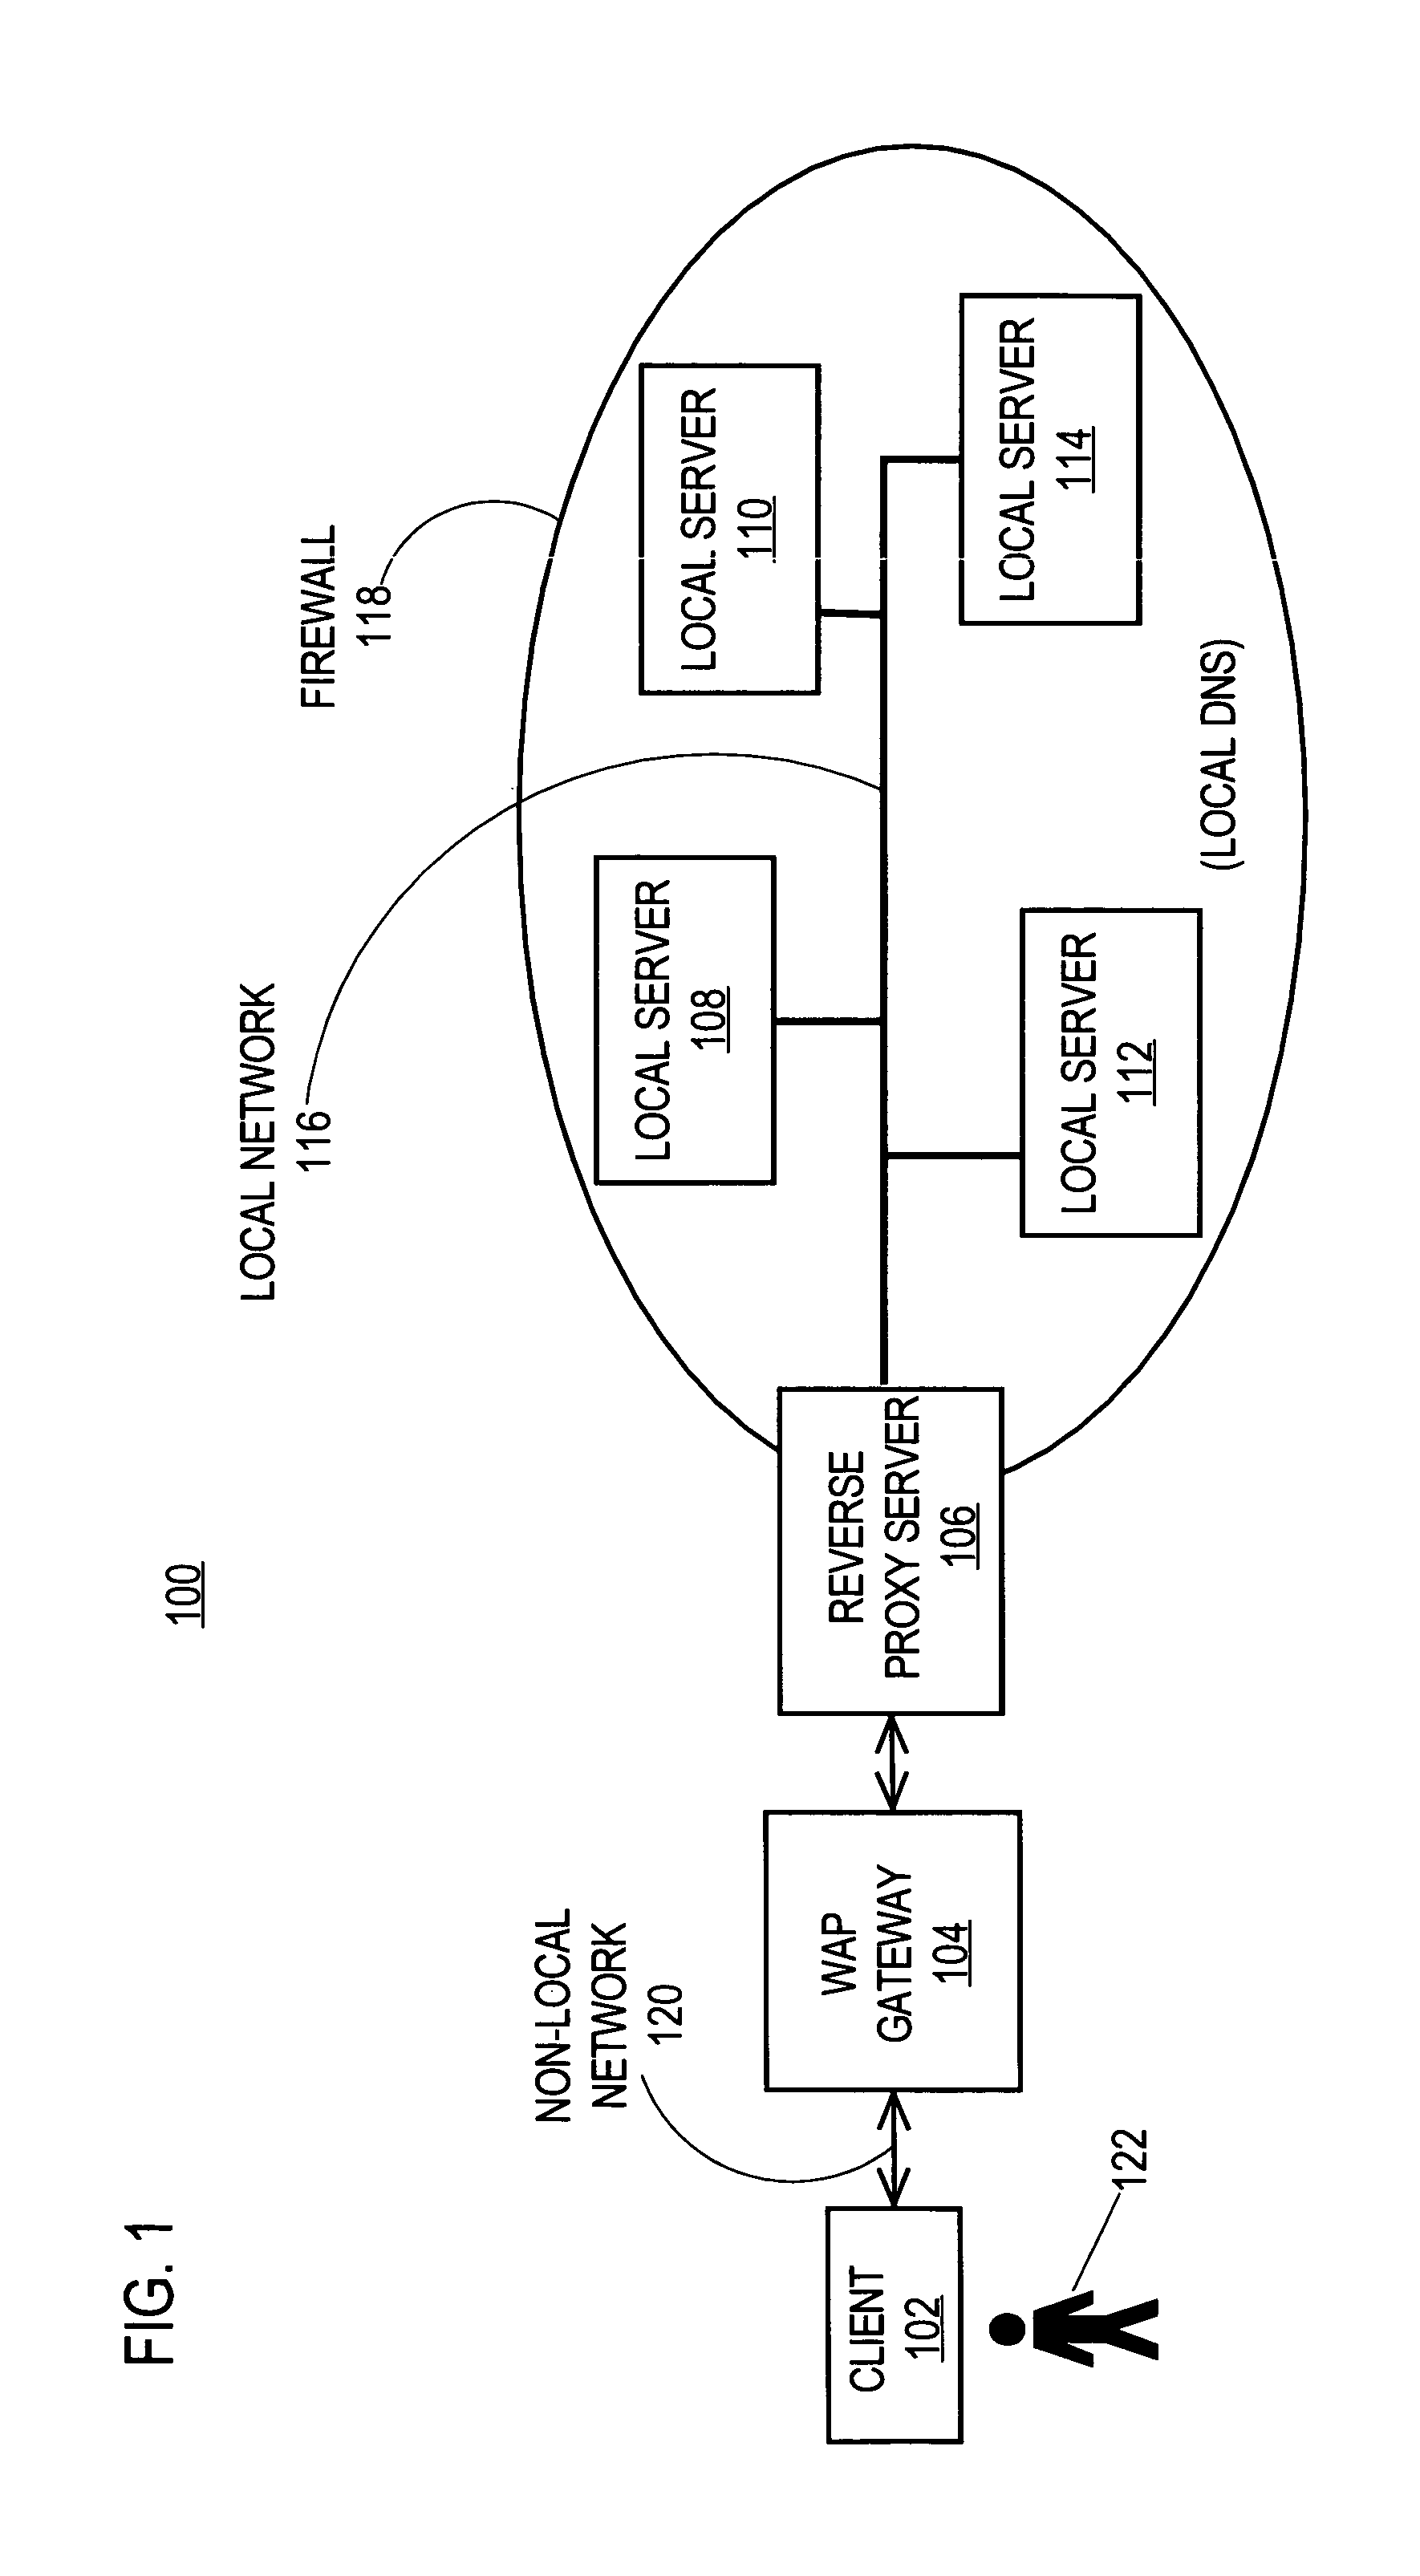 Reverse proxy mechanism for retrieving electronic content associated with a local network